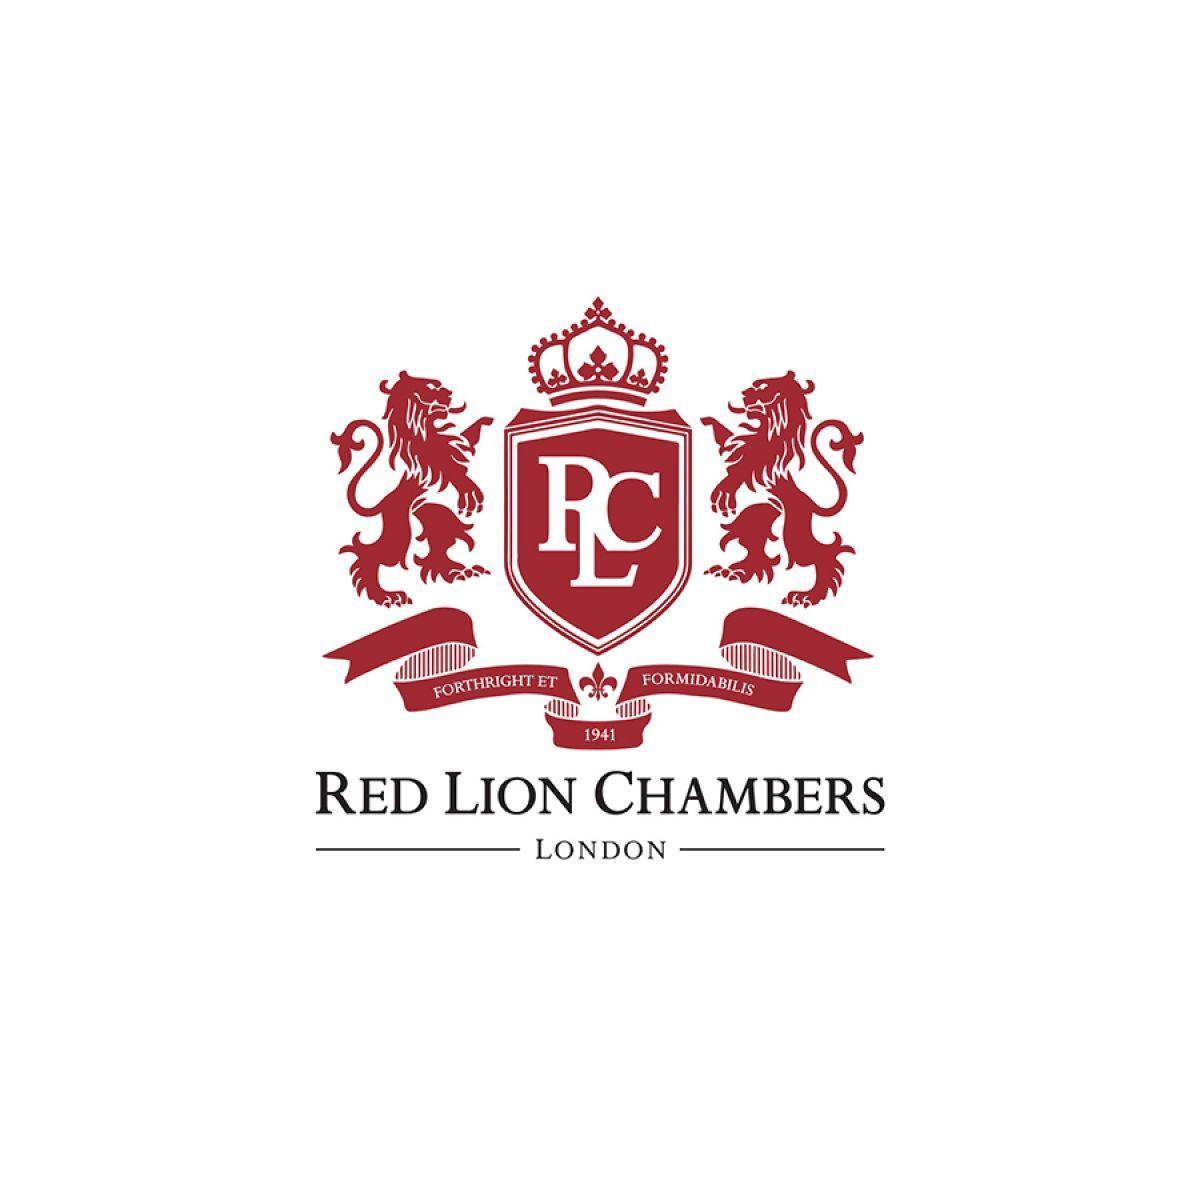 Red Lion Auto Logo - Red Lion Chambers. Tim Marner™ Creative Agency Bolton